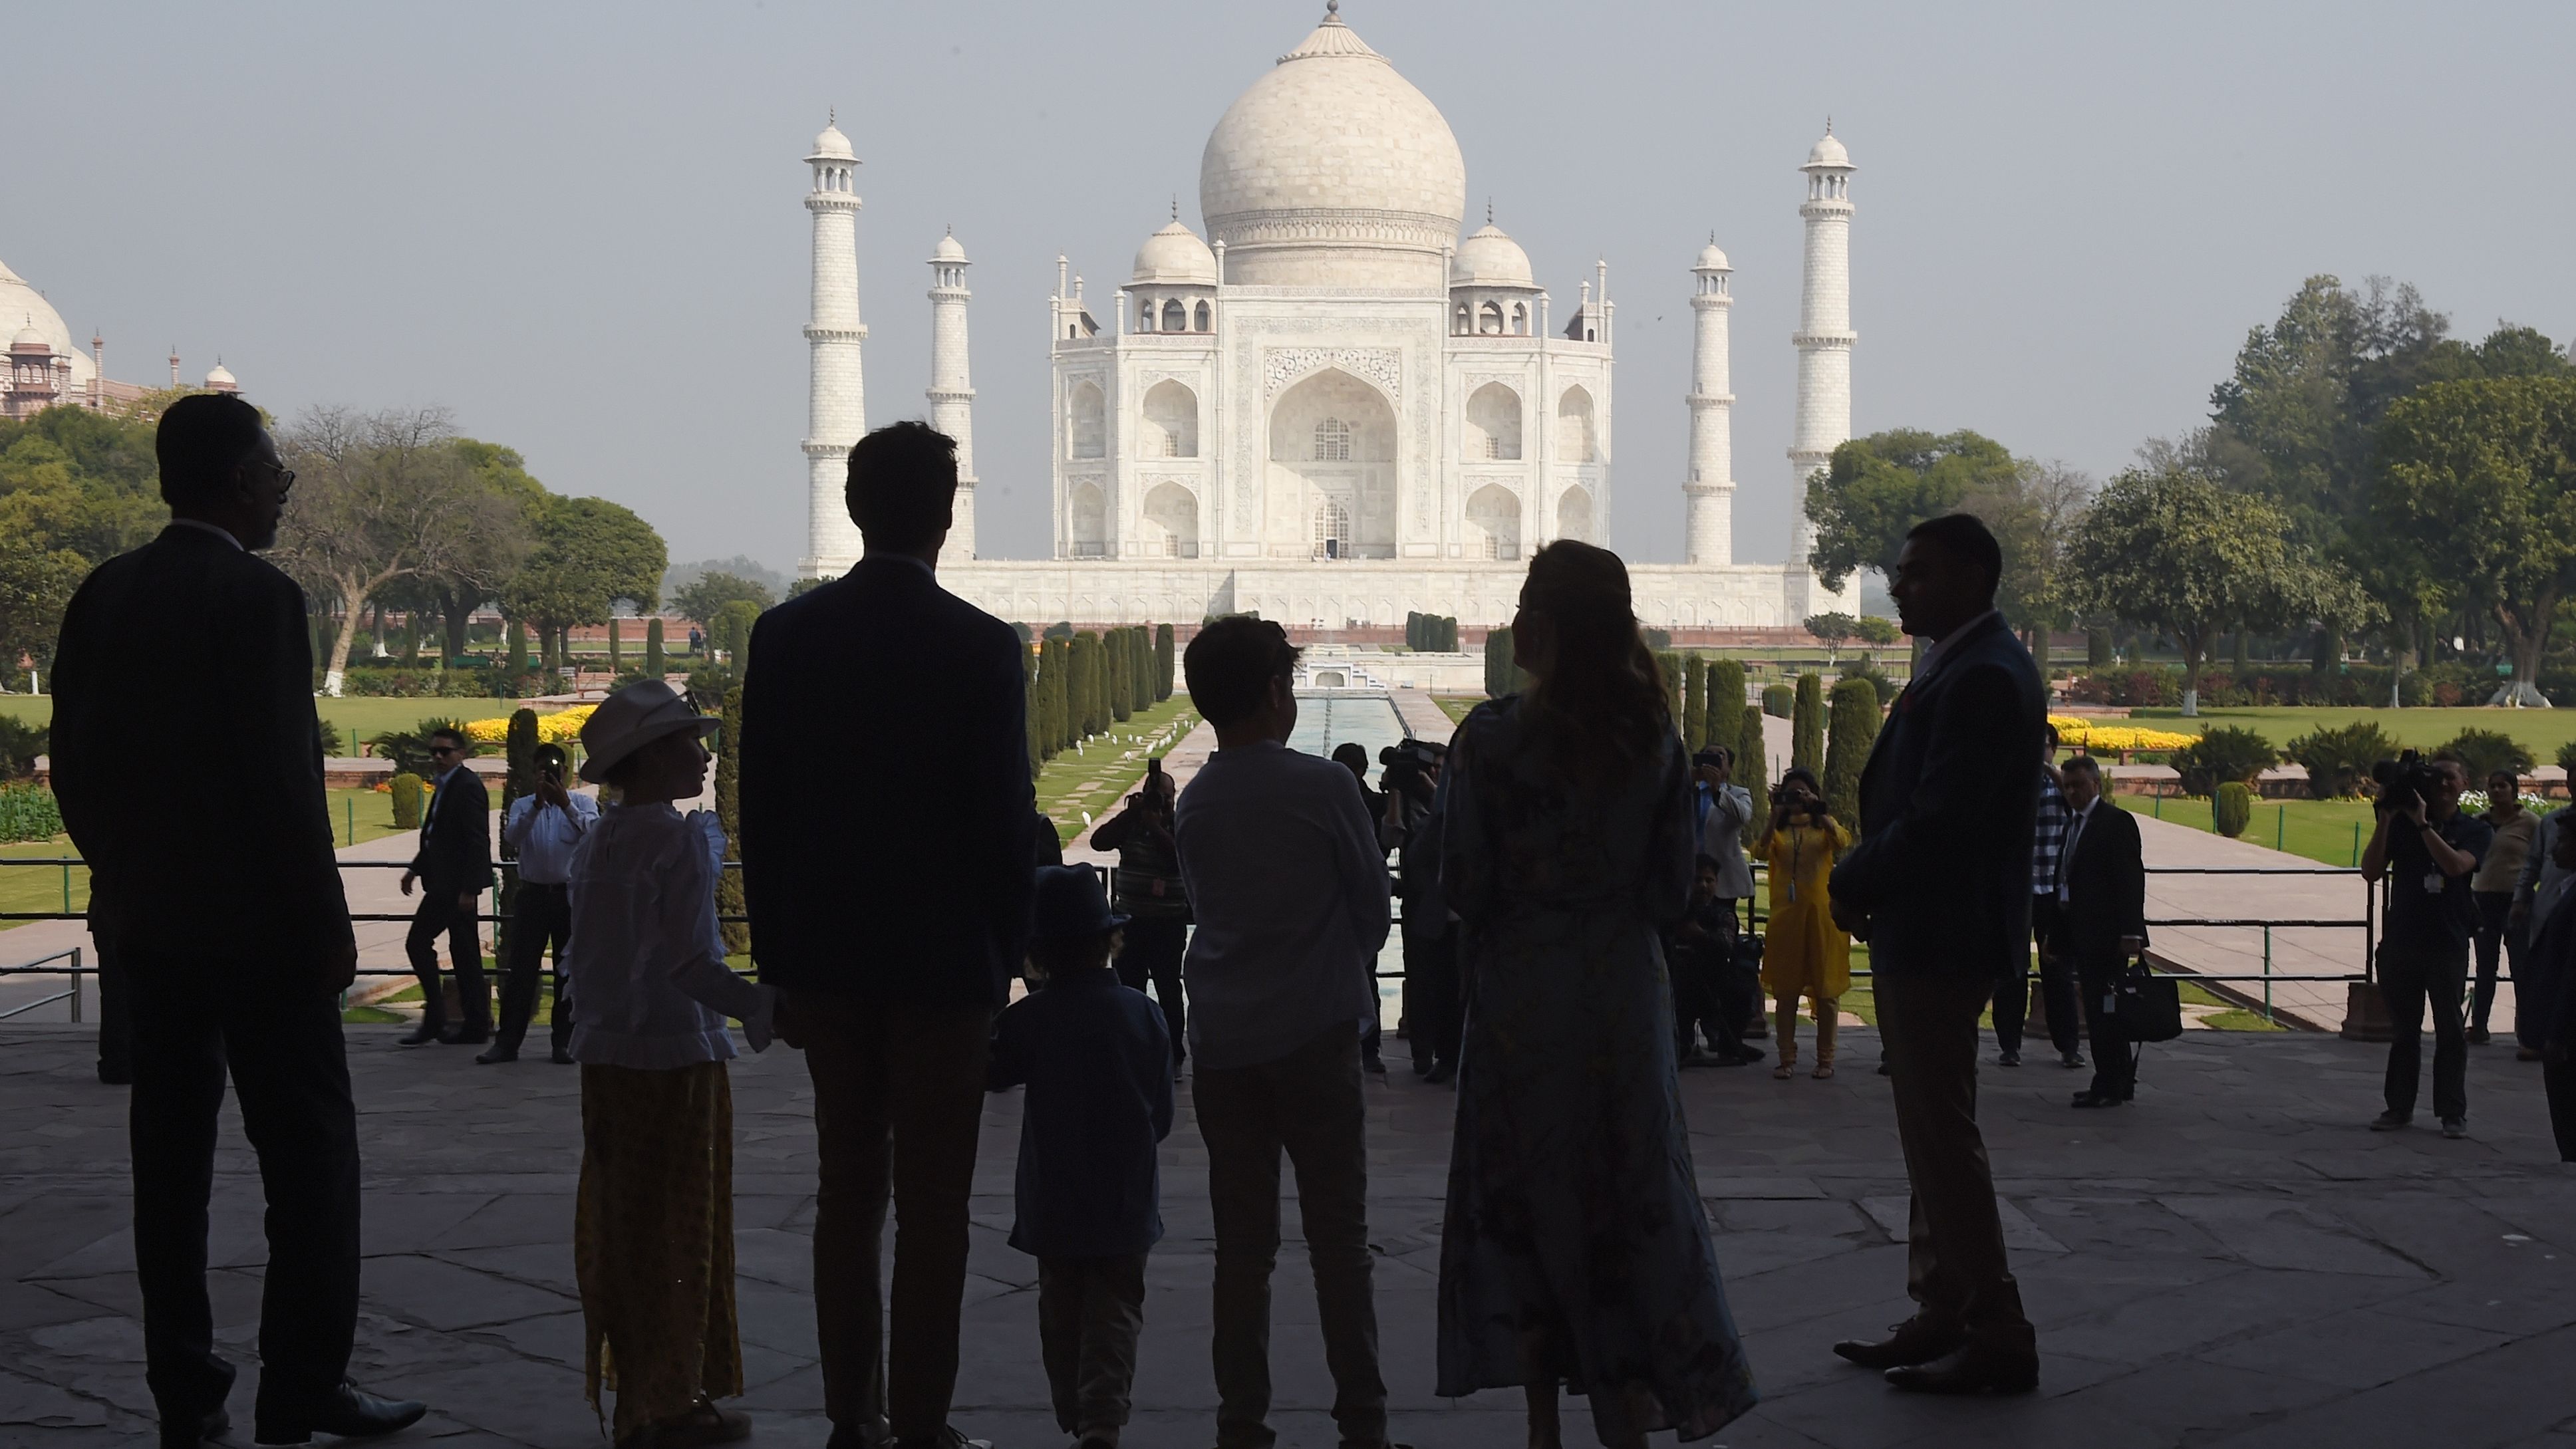 The Trudeau family stands silhouetted in front of the Taj Mahal in Agra on February 18.